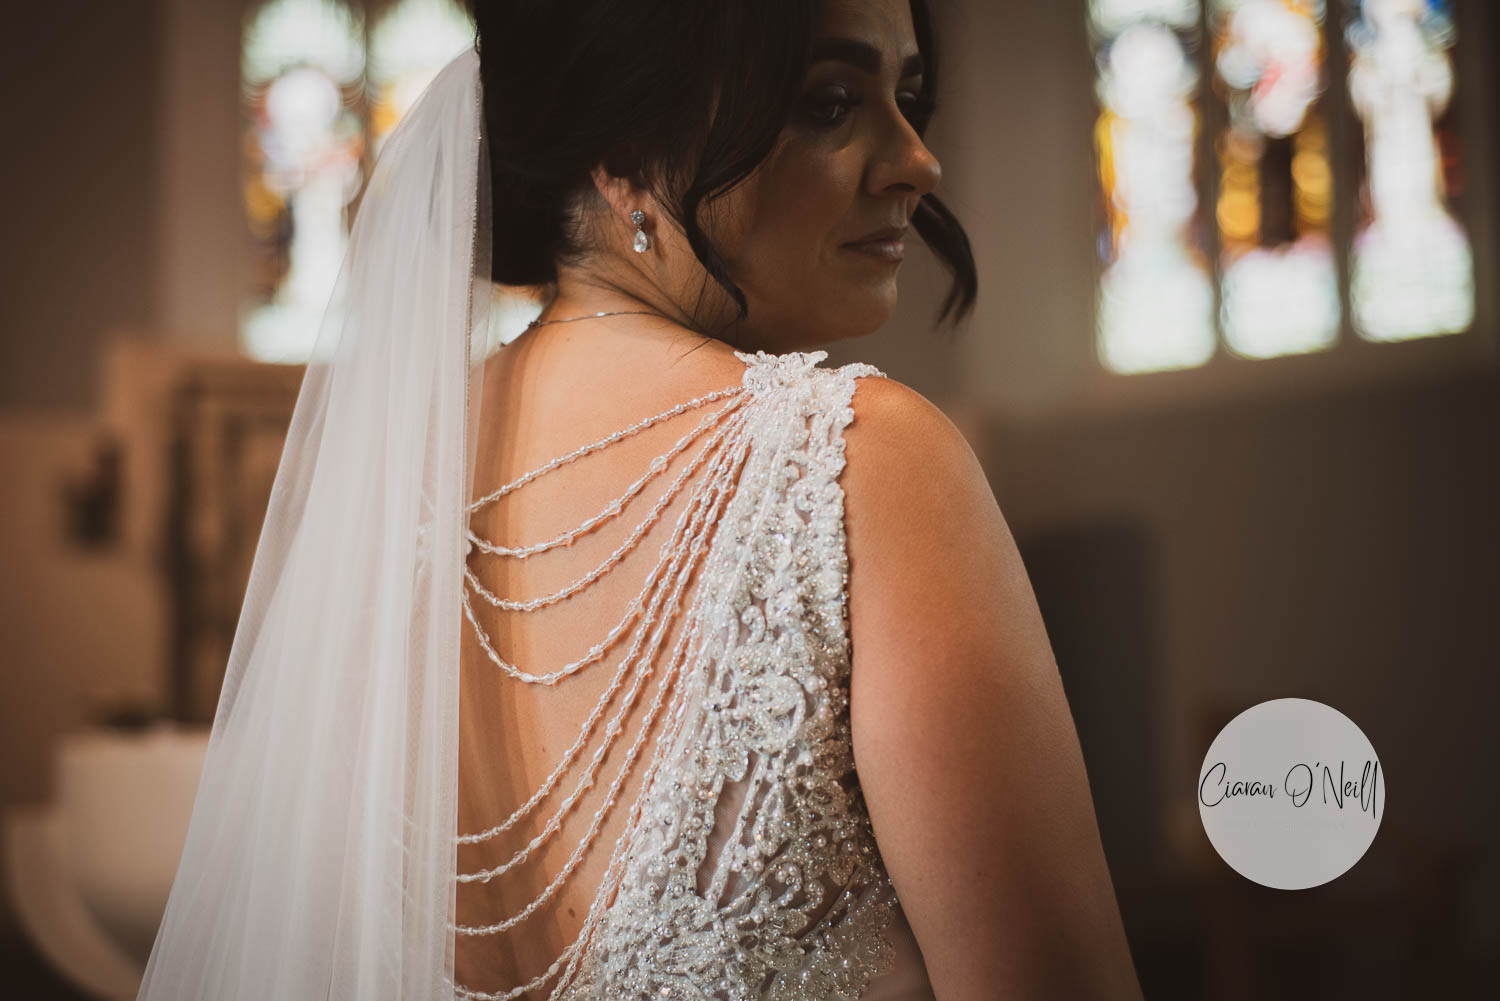 Beautiful bride pictured from the back showing intricate beadwork as she looks over her shoulder